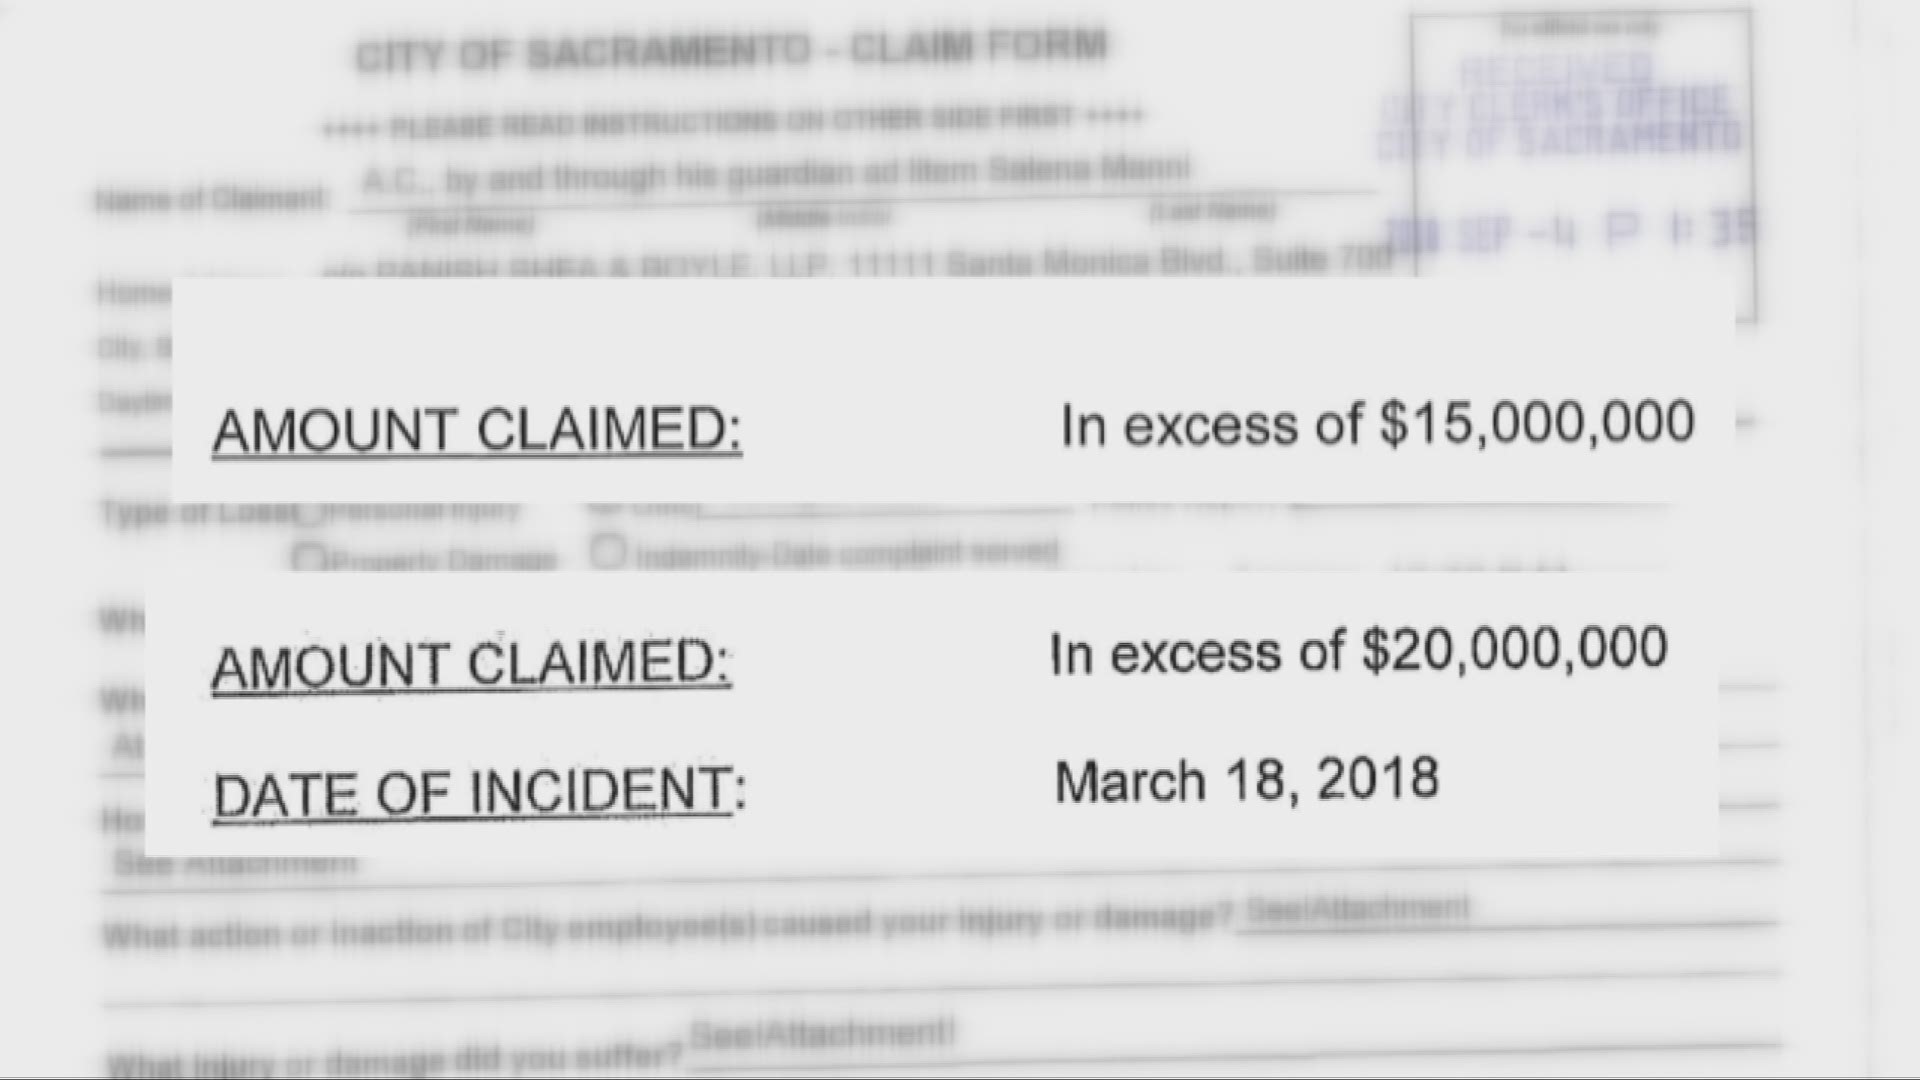 The City of Sacramento has received claim forms from the family of Stephon Clark seeking damages relating to Clark's death. But more than the money, the family says they're seeking change.